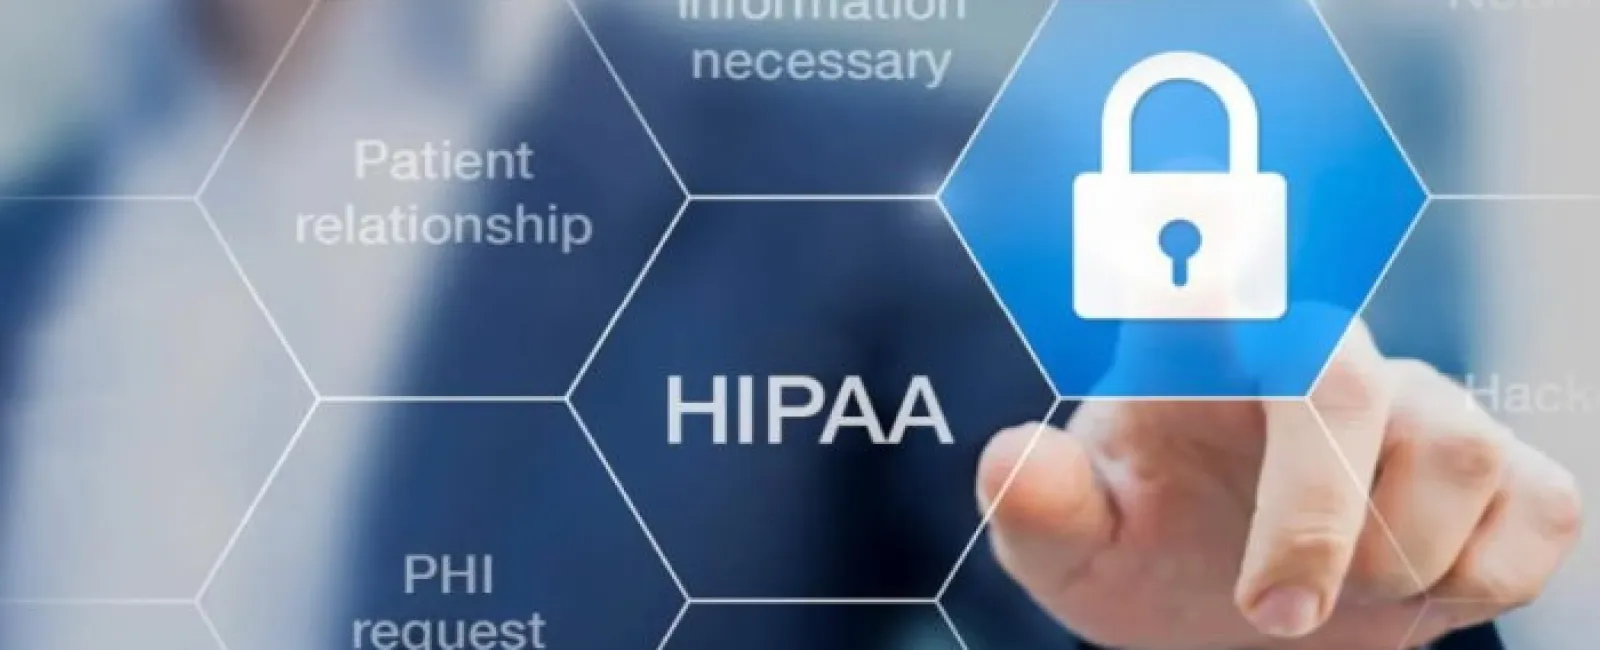 implementing three rules of HIPAA